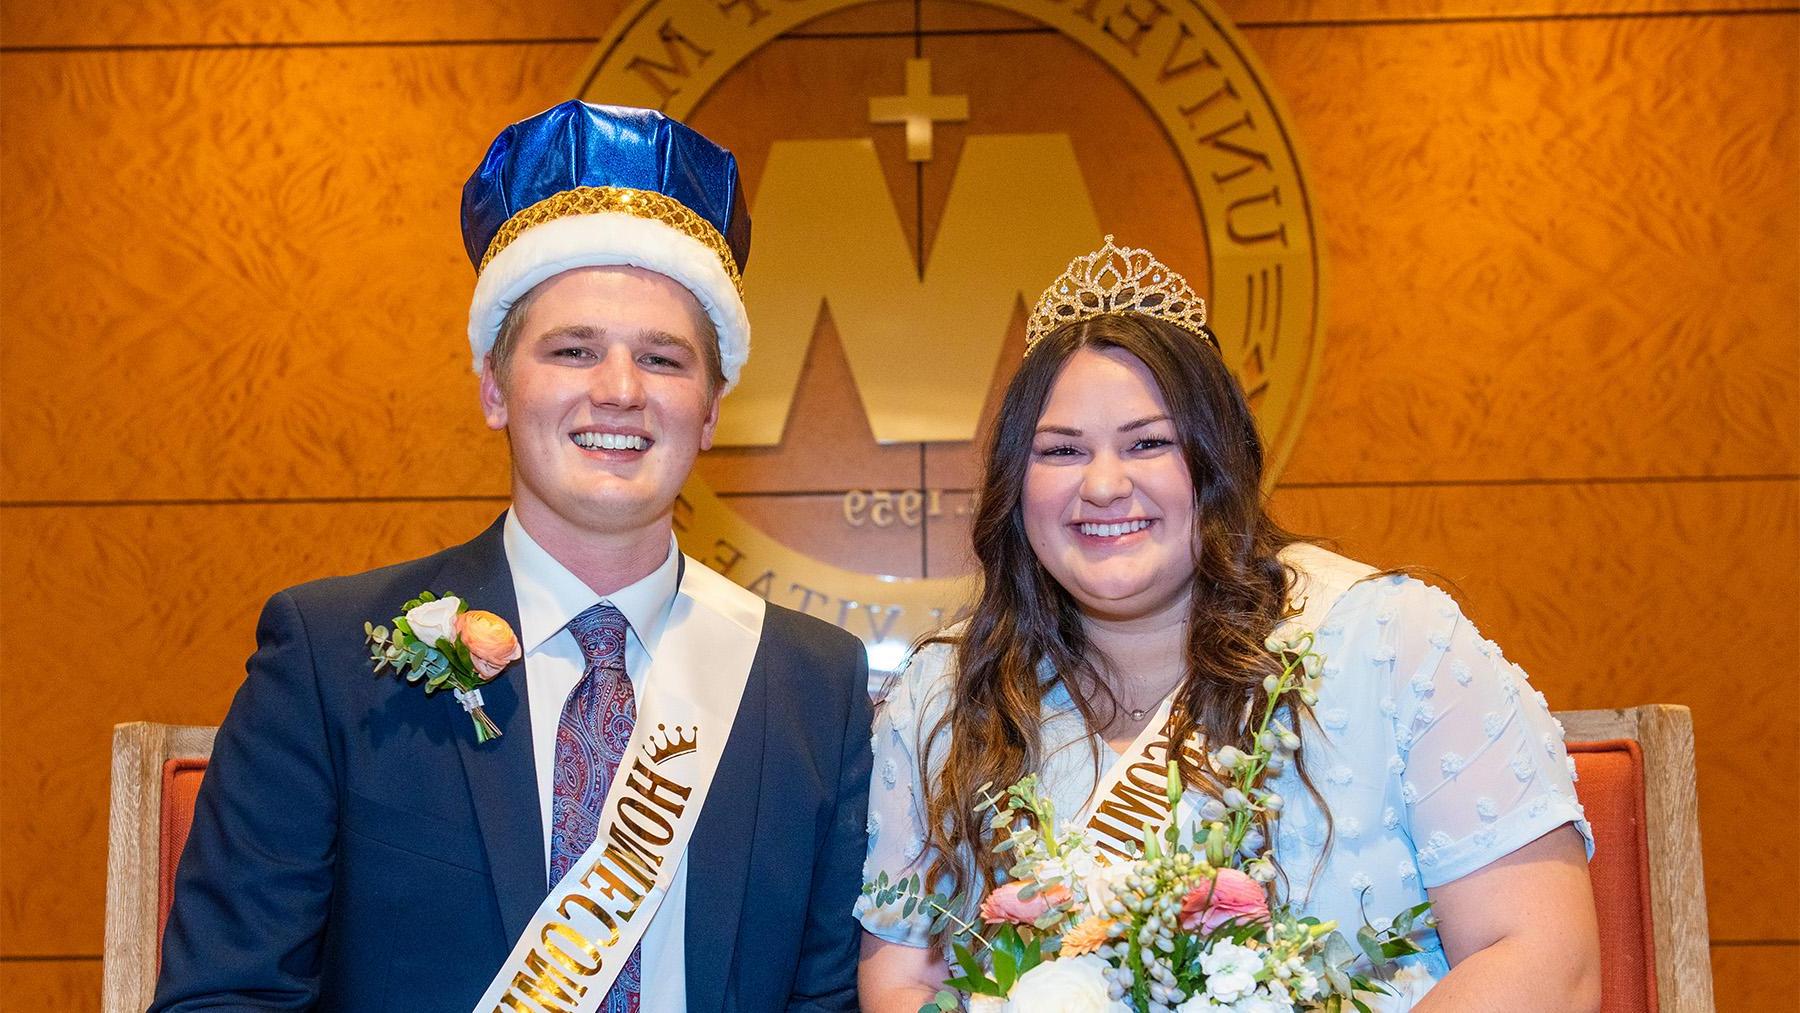 Homecoming Coronation of the King and Queen